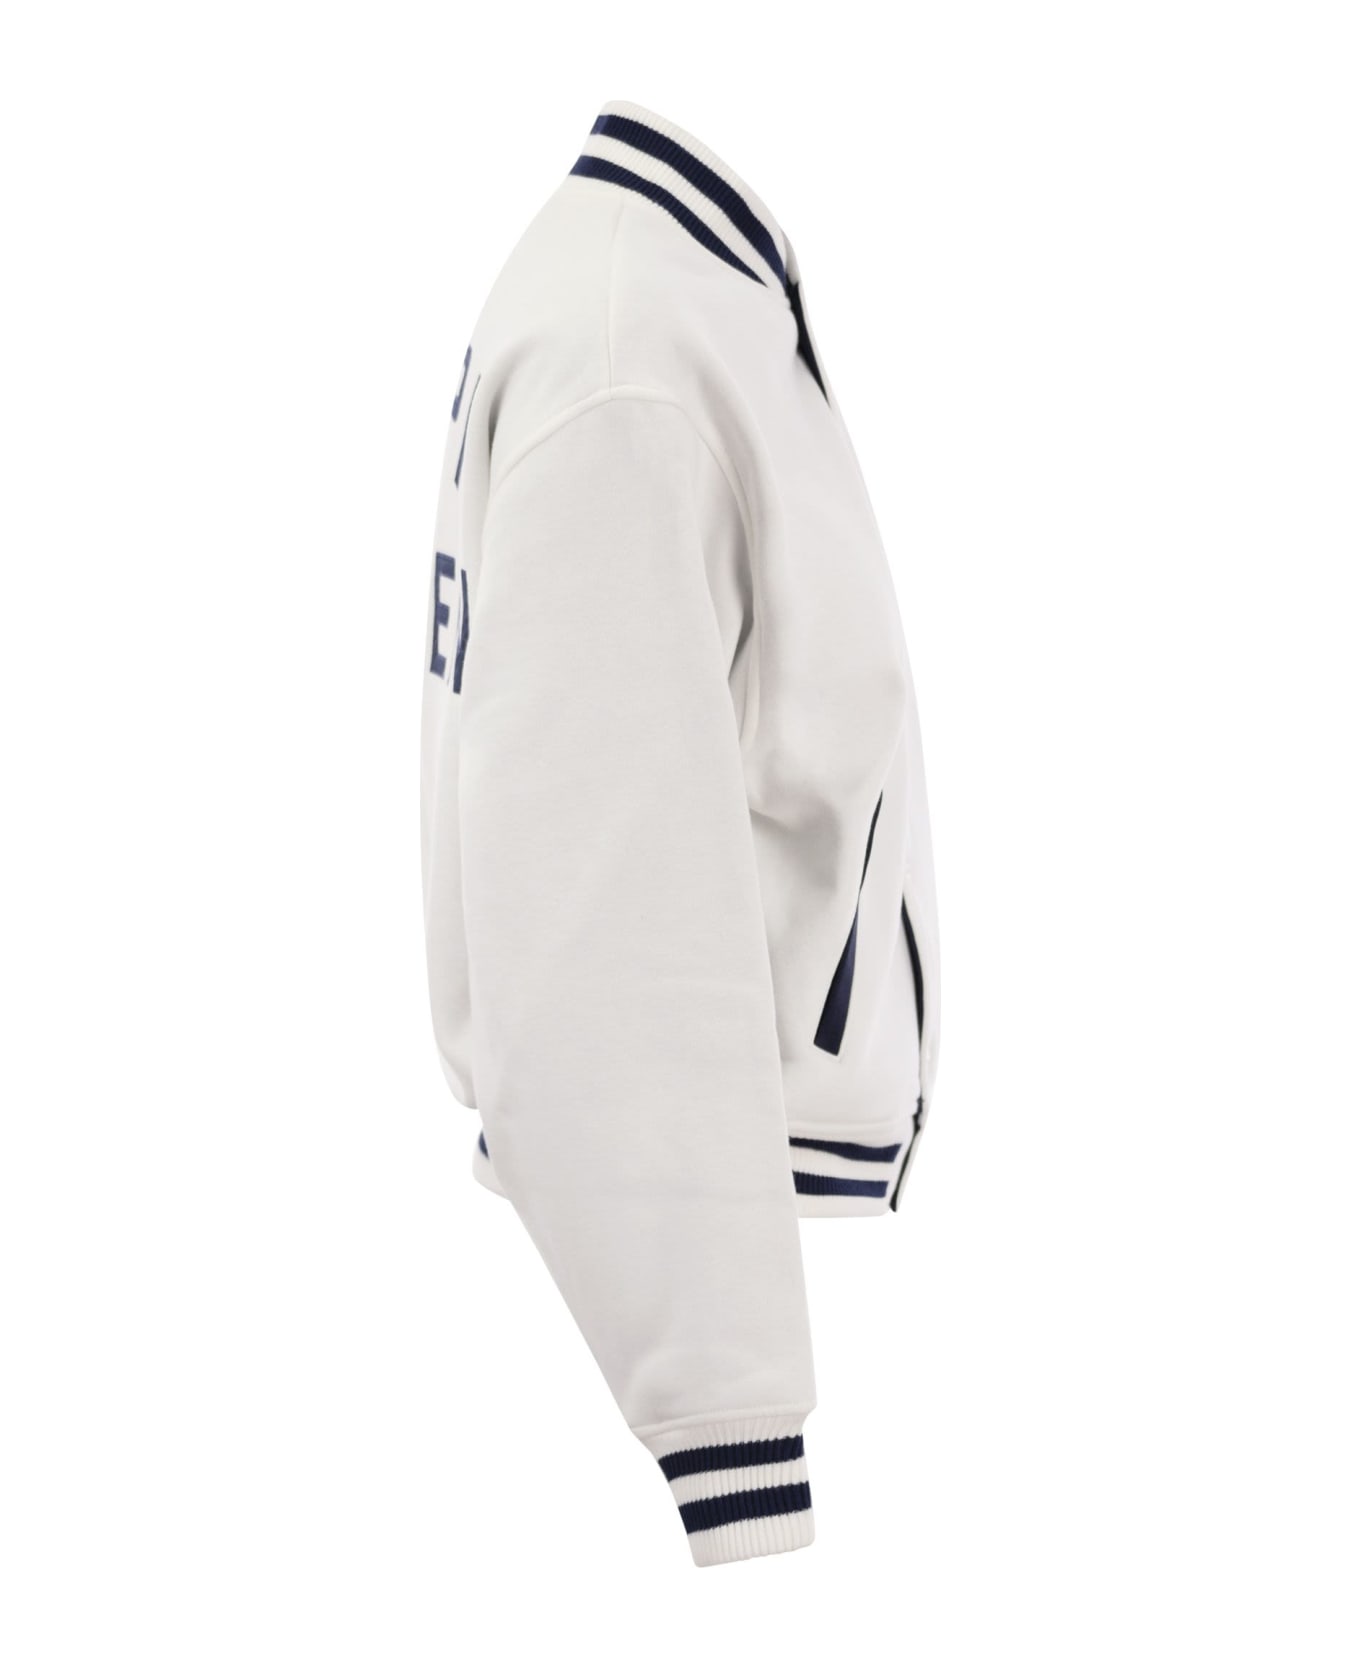 Polo Ralph Lauren Double-sided Bomber Jacket With Rl Logo - White